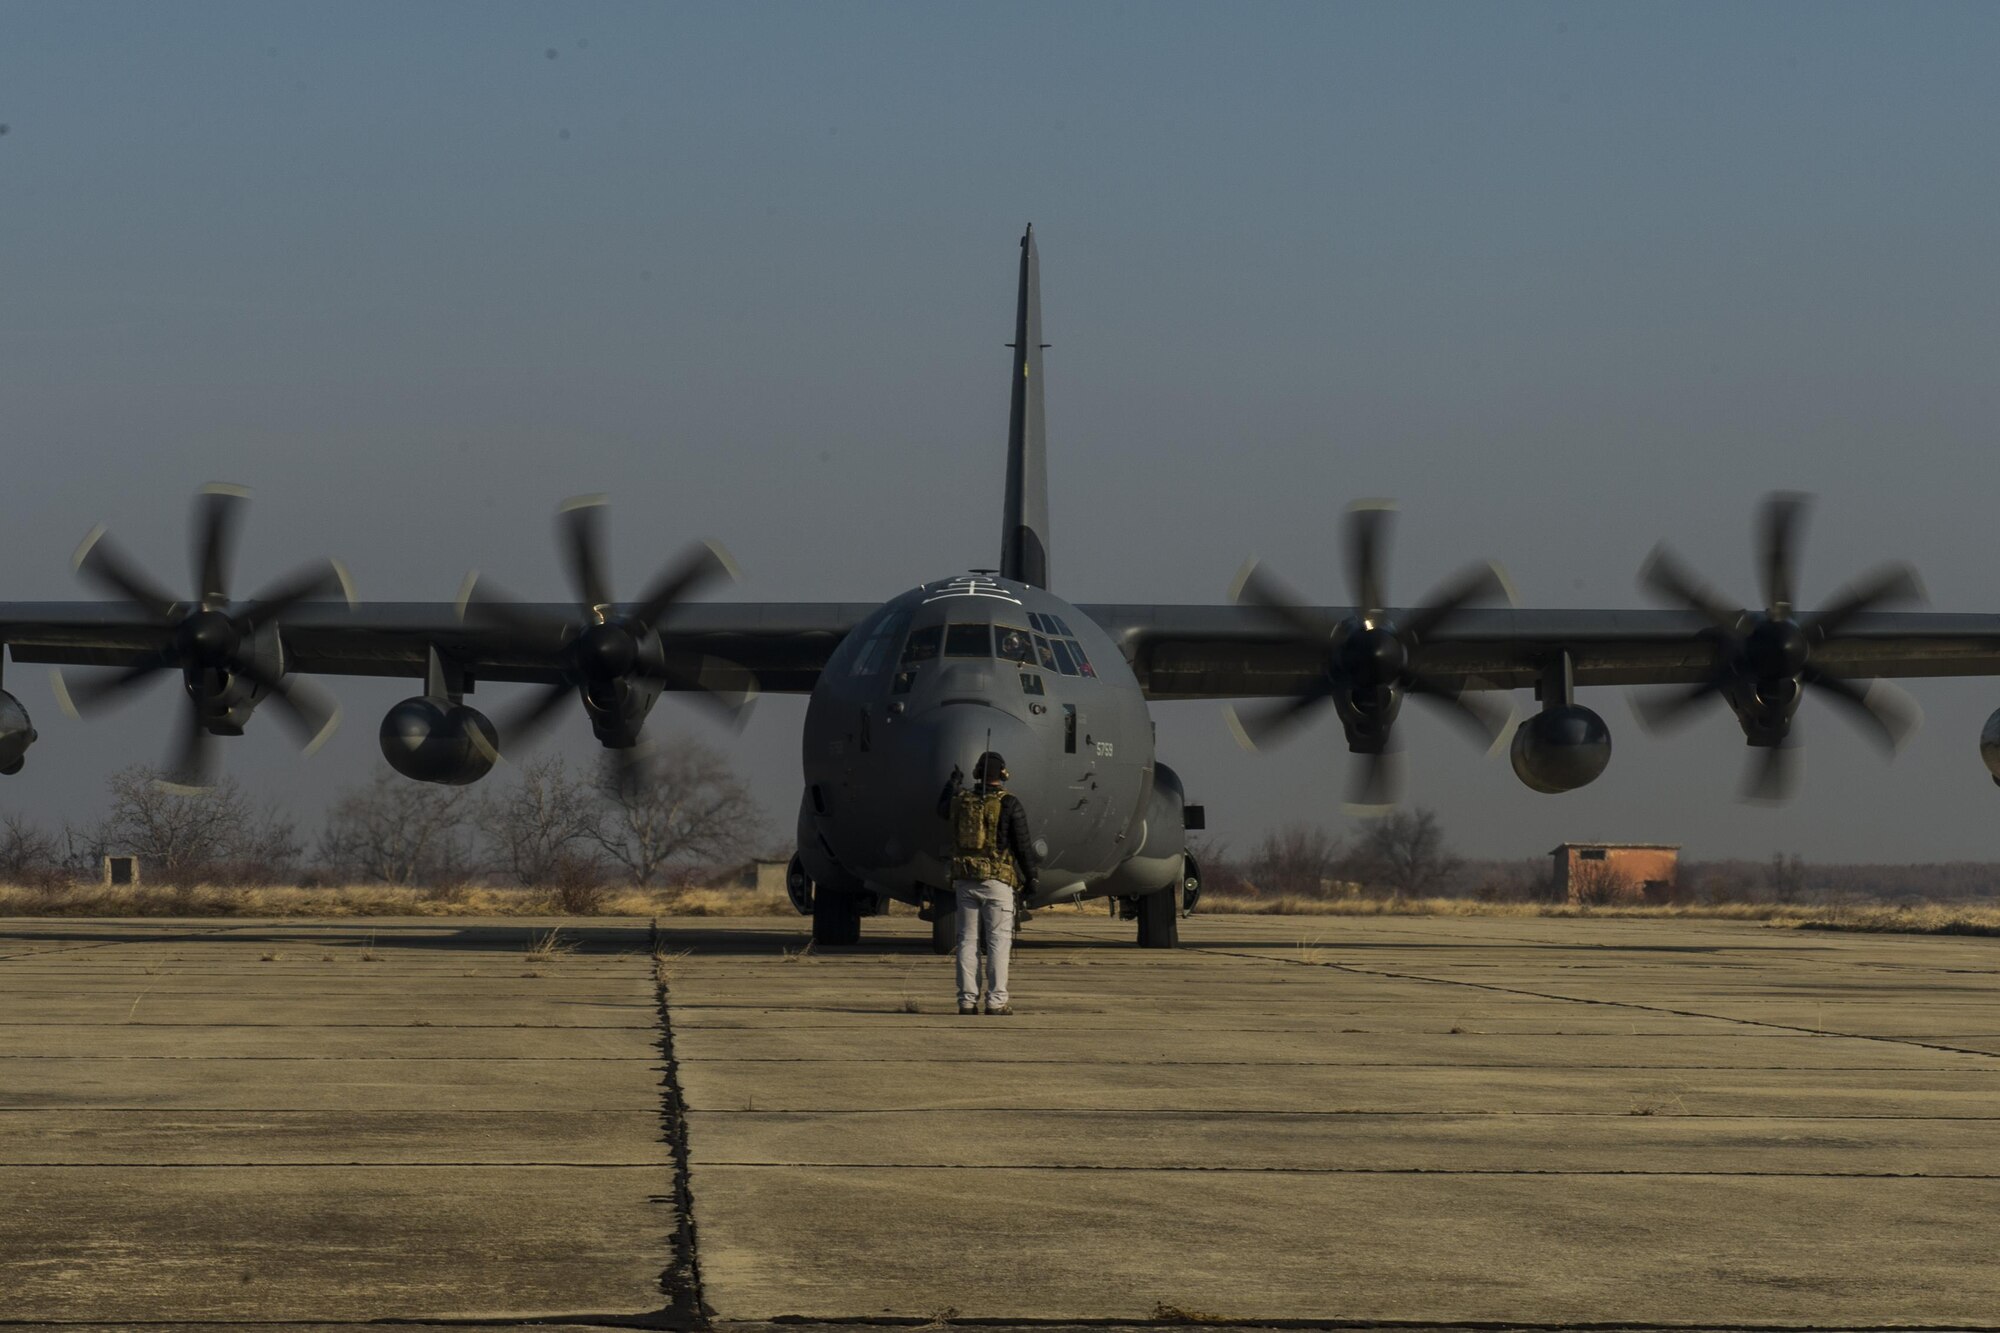 A 321st Special Tactics Squadron combat controller gives a ‘thumbs up’ after marshalling an MC-130J Commando II aircraft, assigned to the 67th Special Operations Squadron, into position during a training exercise at Plovdiv, Bulgaria, Feb. 9, 2016. The C-130 crew conducted austere landing training along with forward area refueling point training in Bulgaria. (U.S. Air Force photo by Airman 1st Class Luke Kitterman/Released)